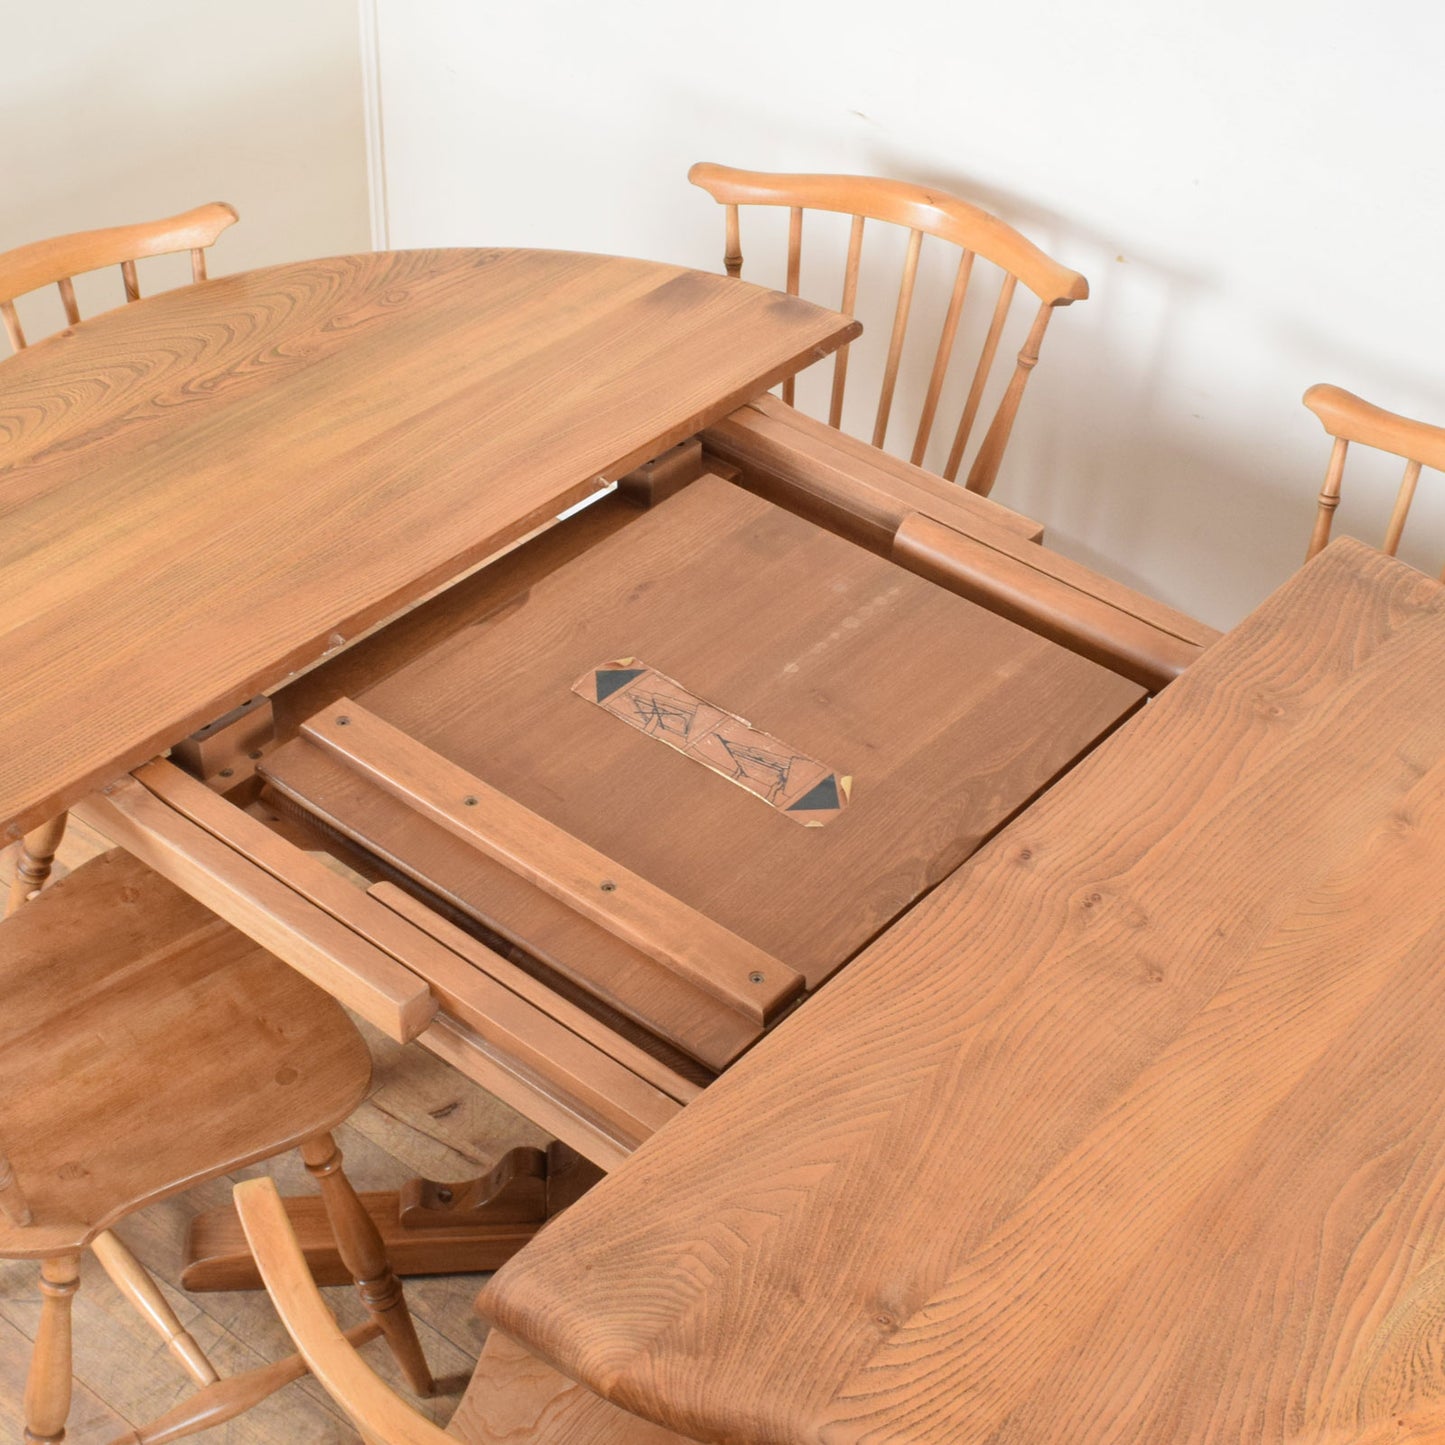 Ercol Extendable Table and Six Chairs